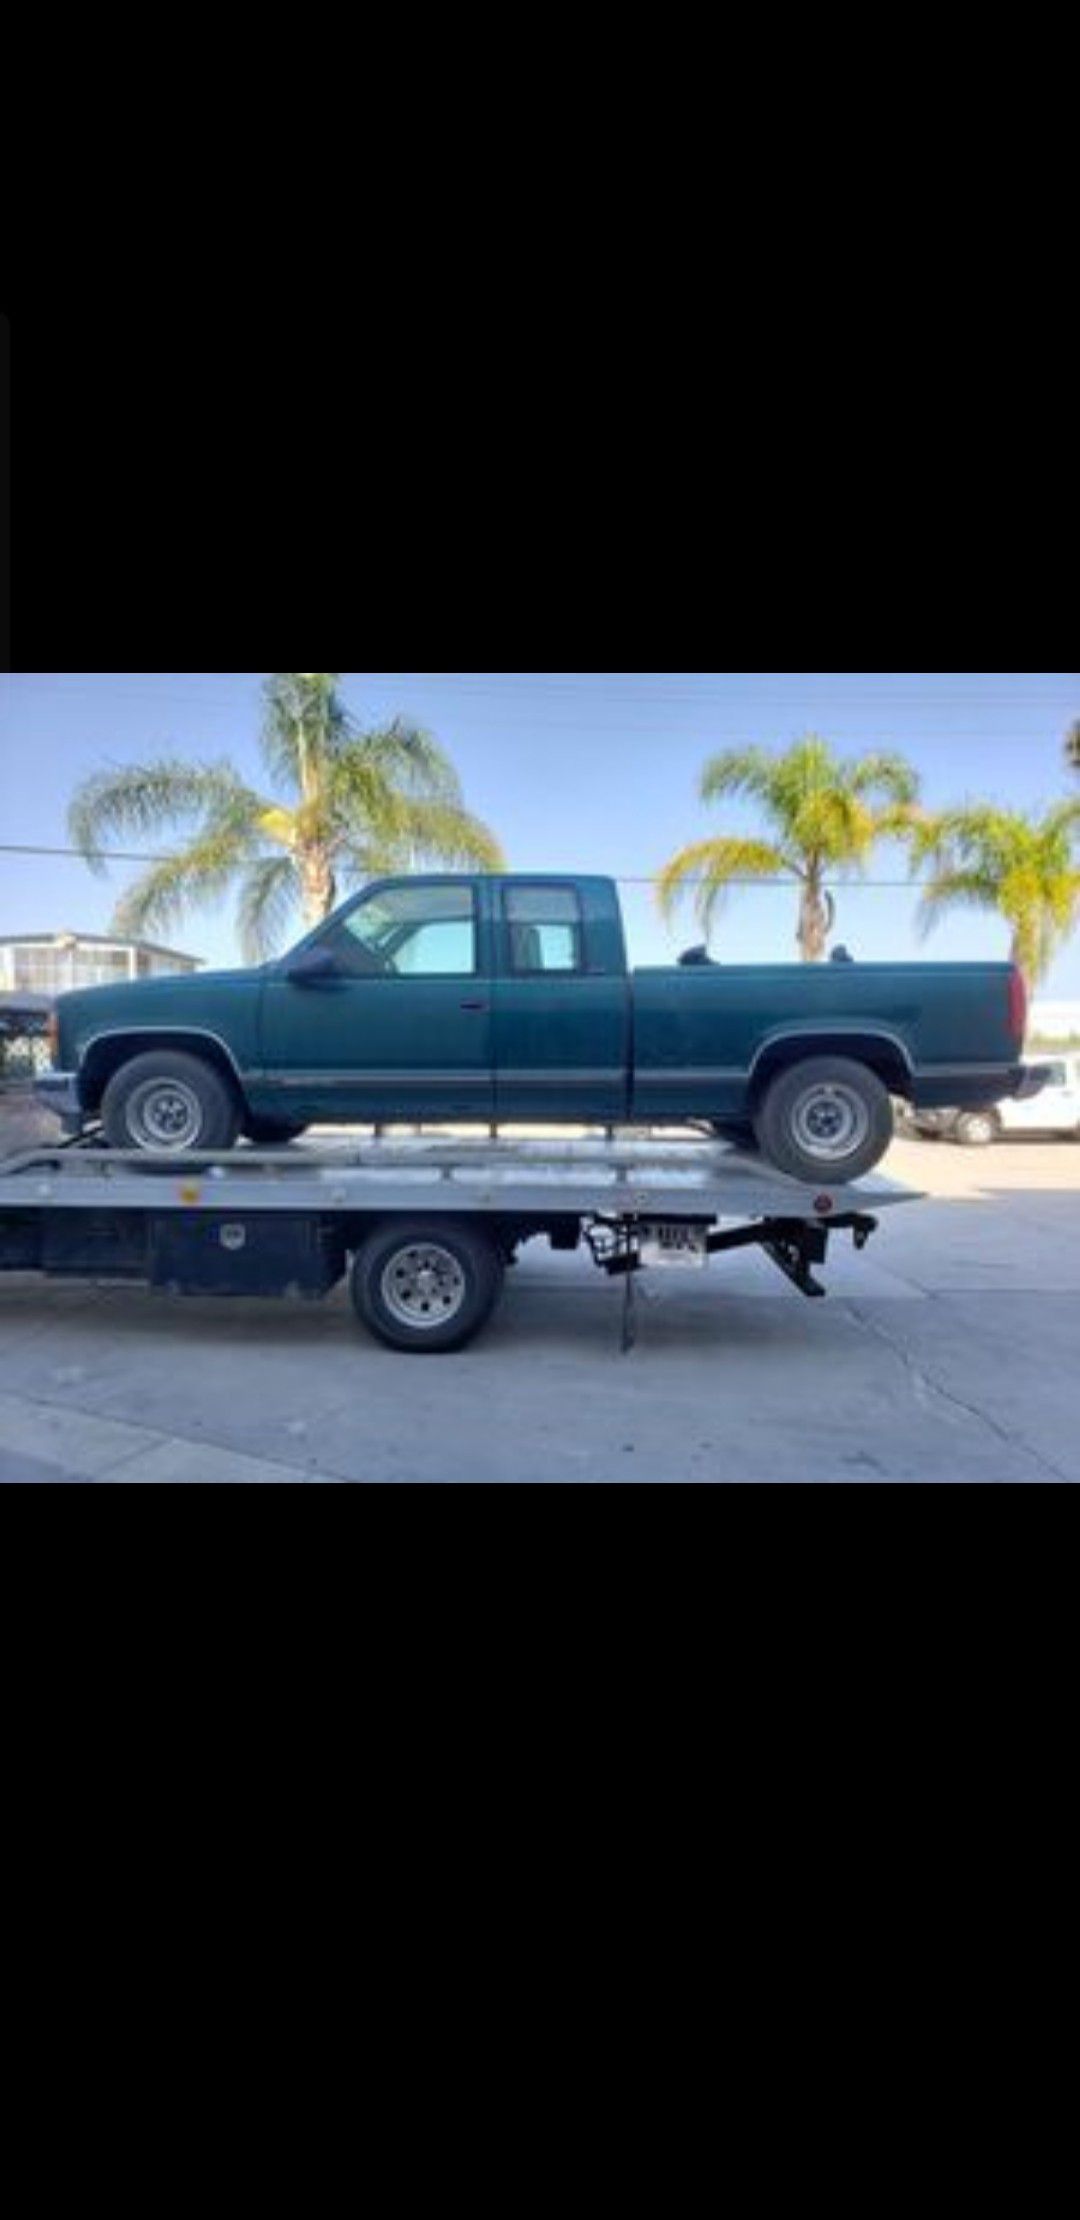 1997 GMC Sierra 1500 Parting Out "PARTS"